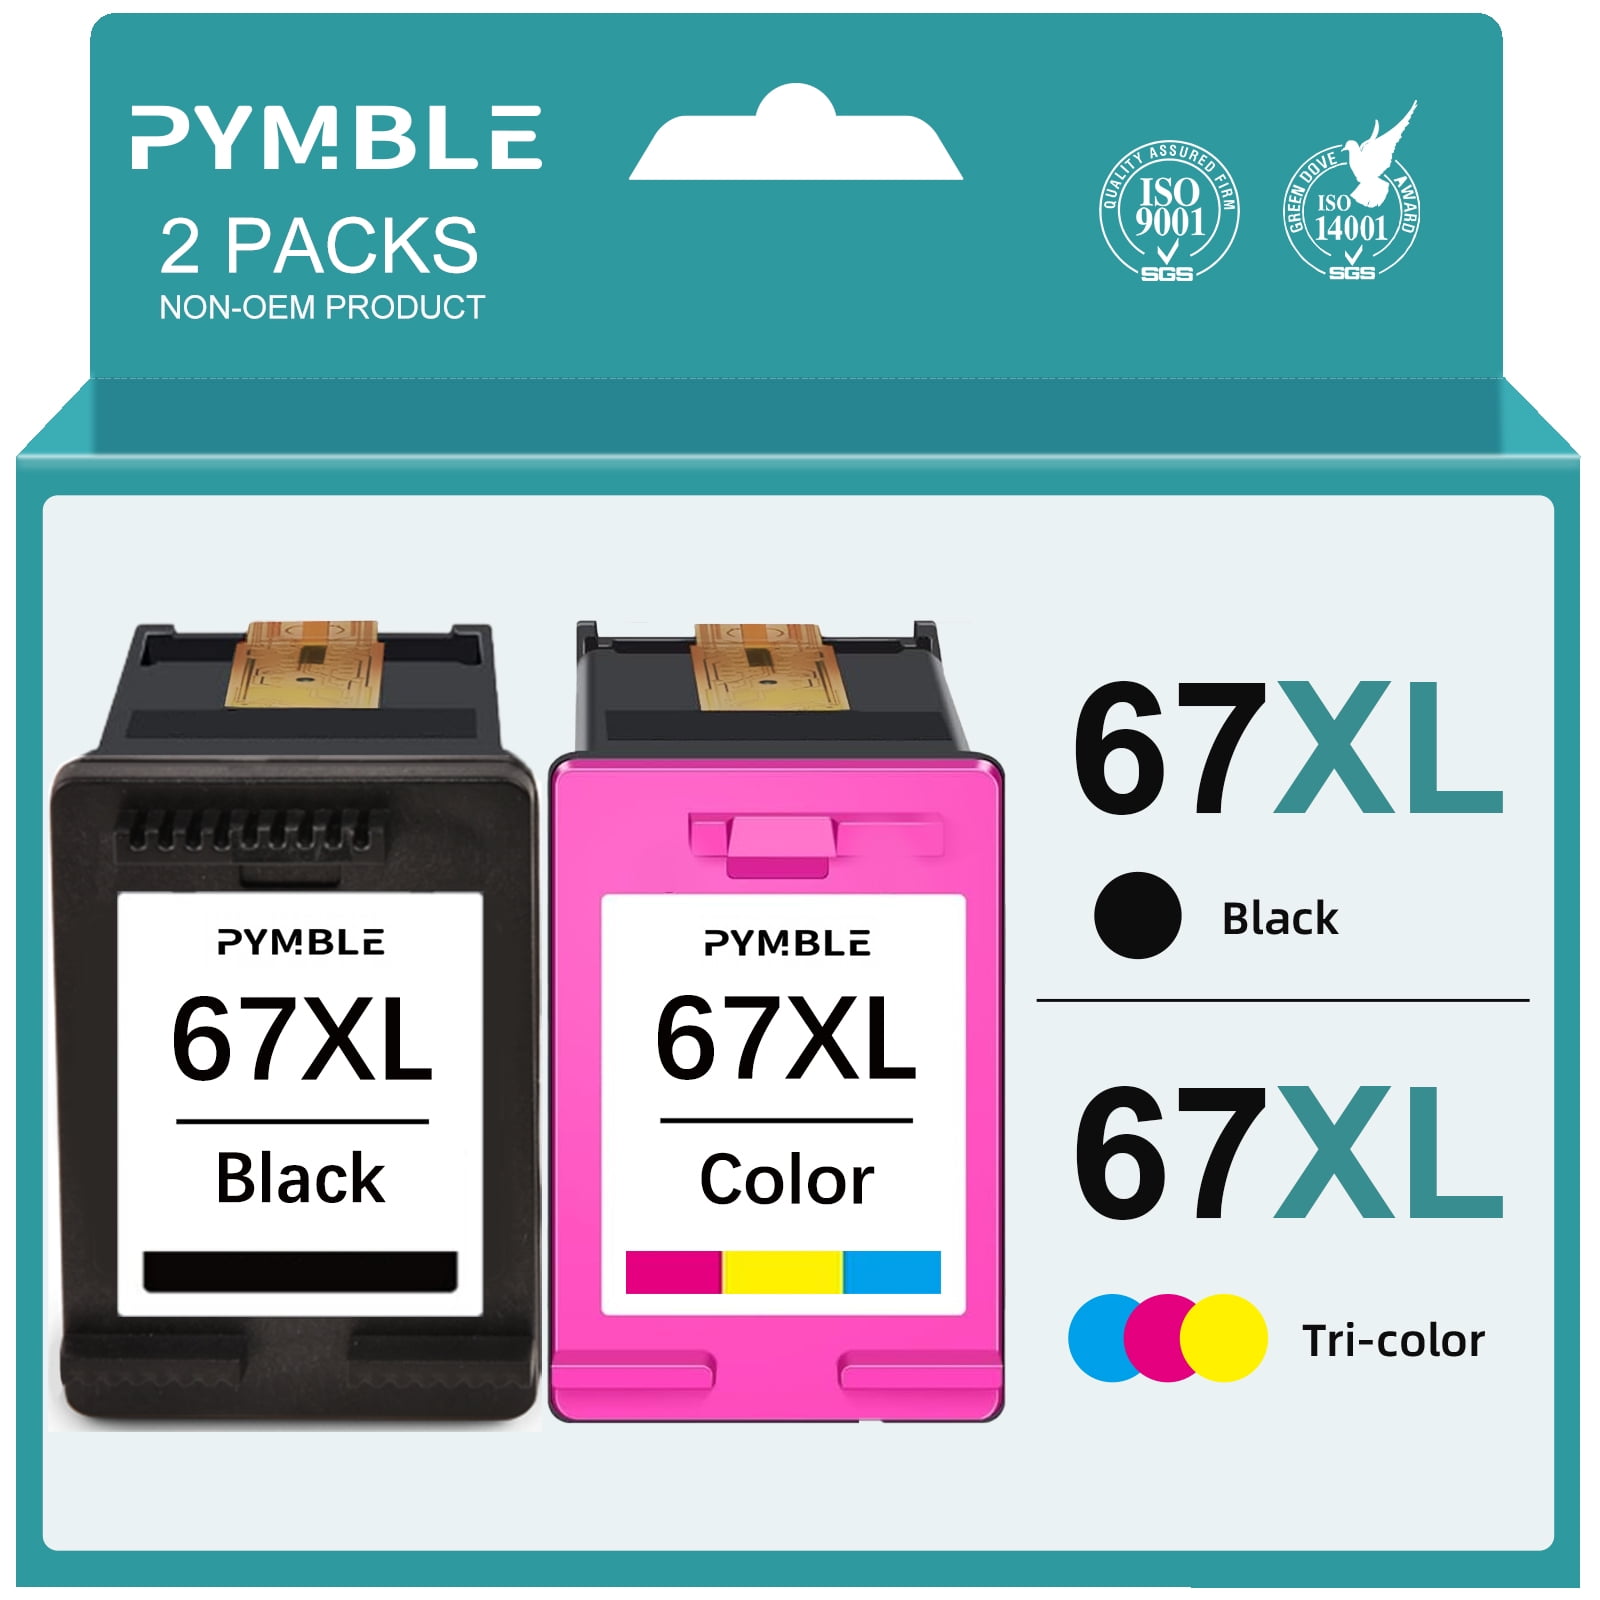 HP 903XL Cartridge Black - Coolblue - Before 23:59, delivered tomorrow